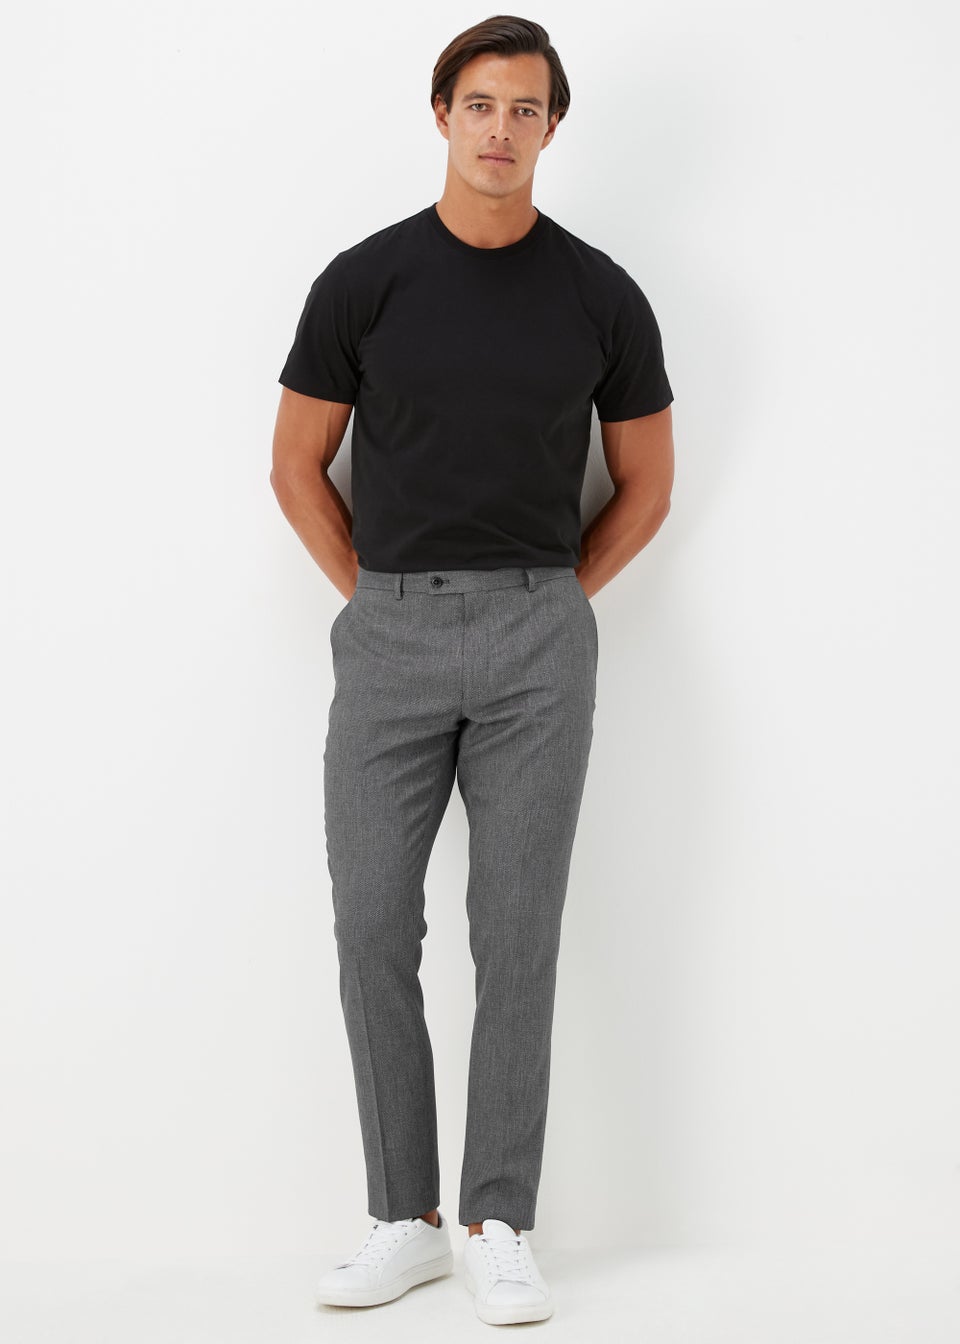 Taylor & Wright Albert Charcoal Skinny Fit Suit Trousers